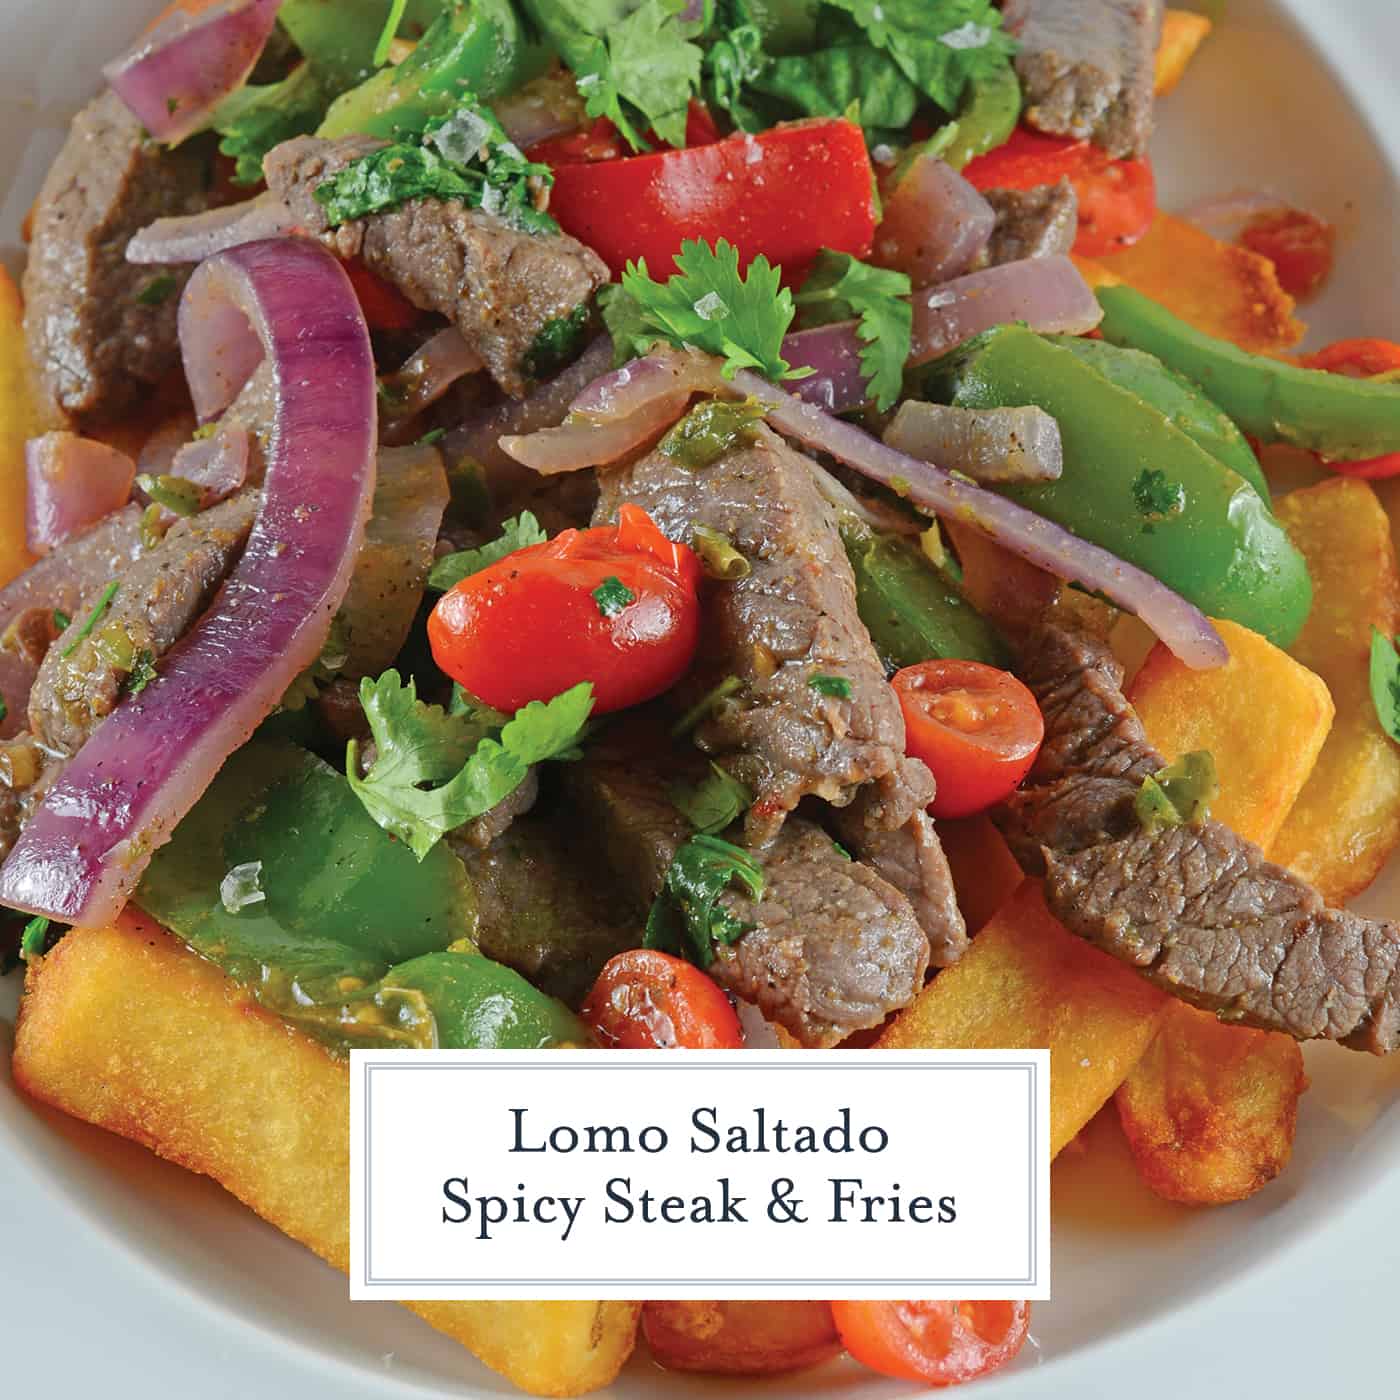 Lomo Saltado is a Peruvian dish using tender steak, onions, tomatoes, bell peppers and jalapenos over crispy French fries. #lomosaltado #steakandpotatoes www.savoryexperiments.com